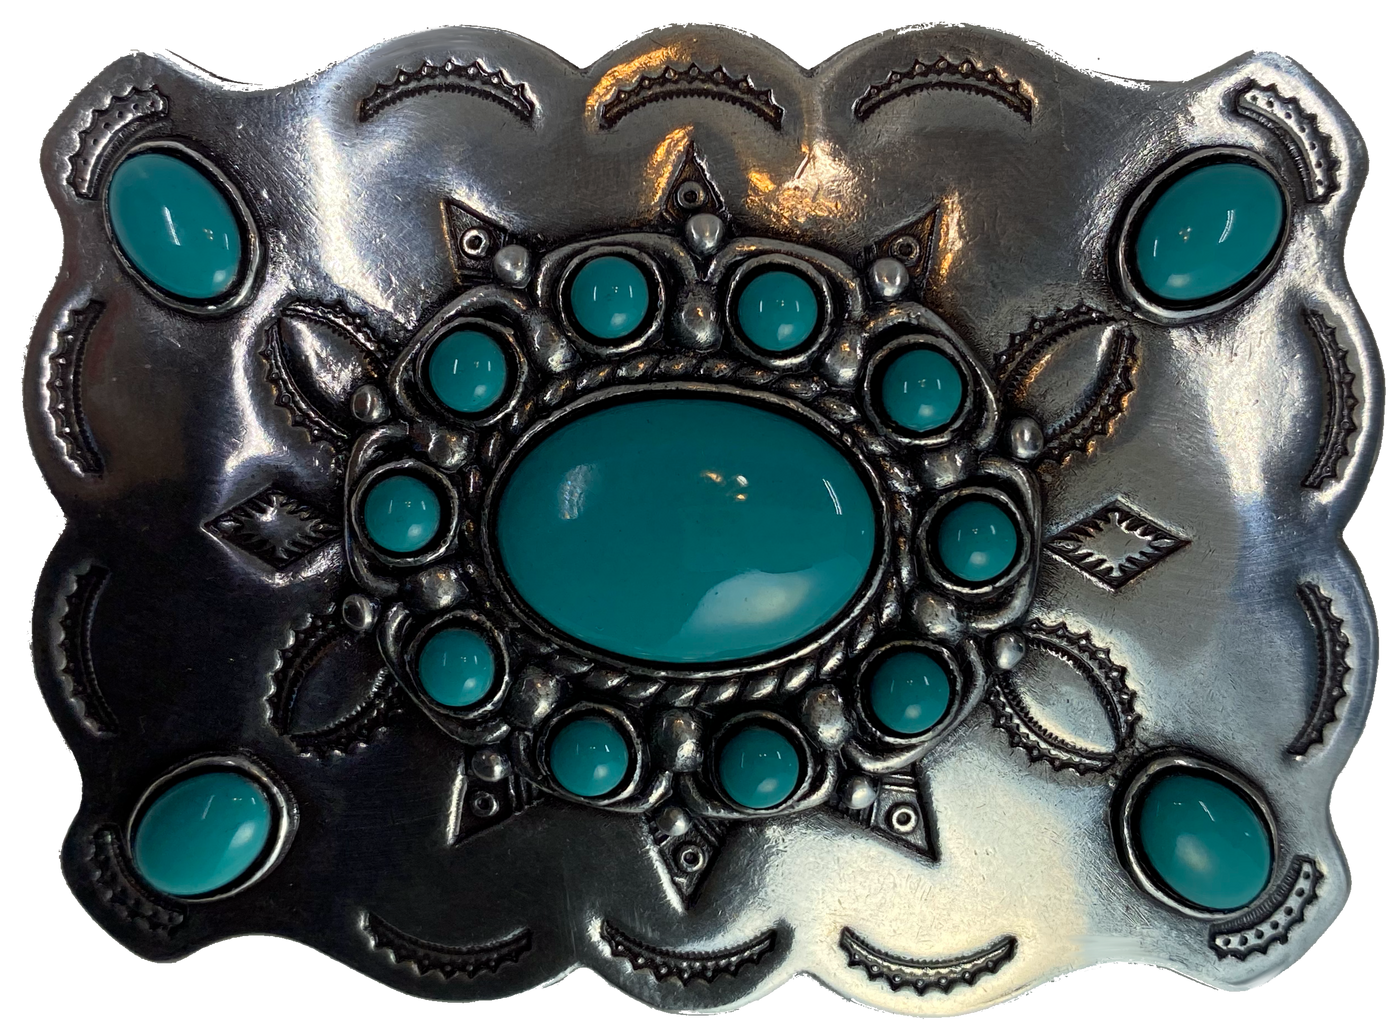 Southwestern style belt buckle with Southwestern tooling, scalloped design around edges, and simulated turquoise stones, approx. size 3 1/2" wide by 2 1/2" tall.  Color is antique silver, buckle is made of zinc. Fits belts 1 1/2" wide. Available online and in our shop just outside Nashville in Smyrna, TN.